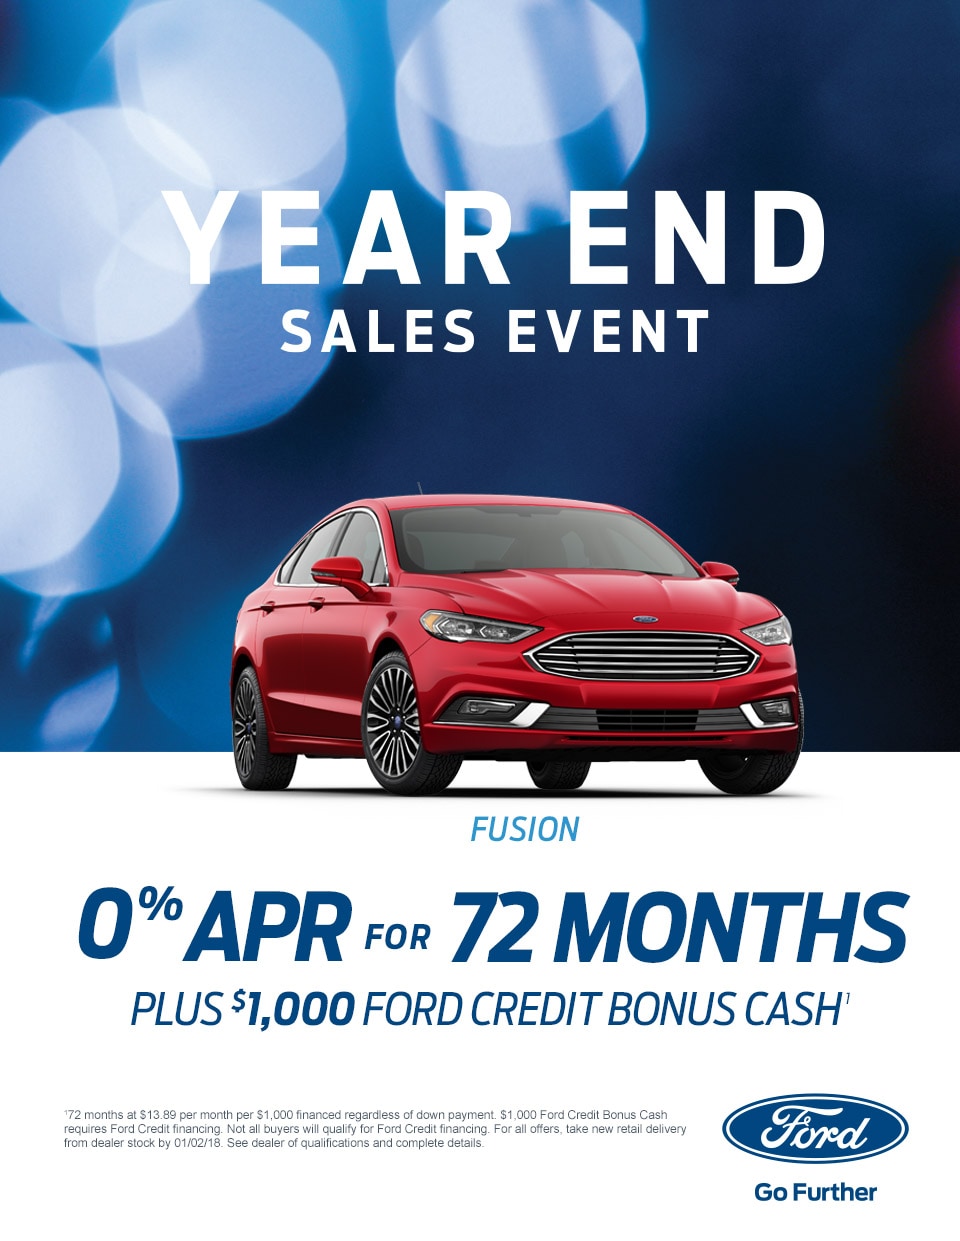 Ford Year End Sale Event Yearend Deals on Vehicles Apple Ford of